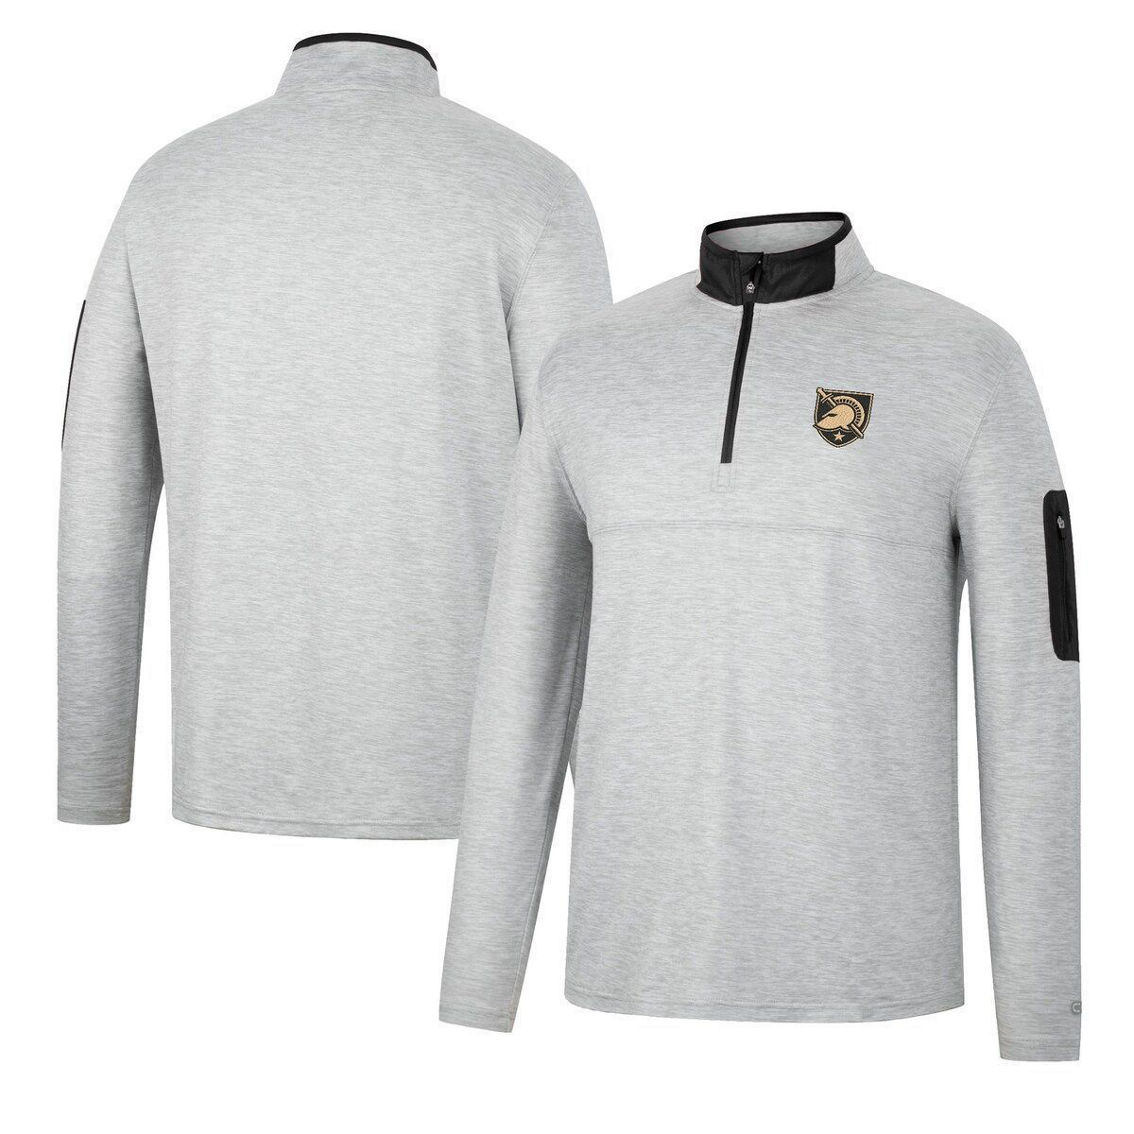 Colosseum Men's Heathered Gray/Black Army Black Knights Country Club Windshirt Quarter-Zip Jacket - Image 2 of 4